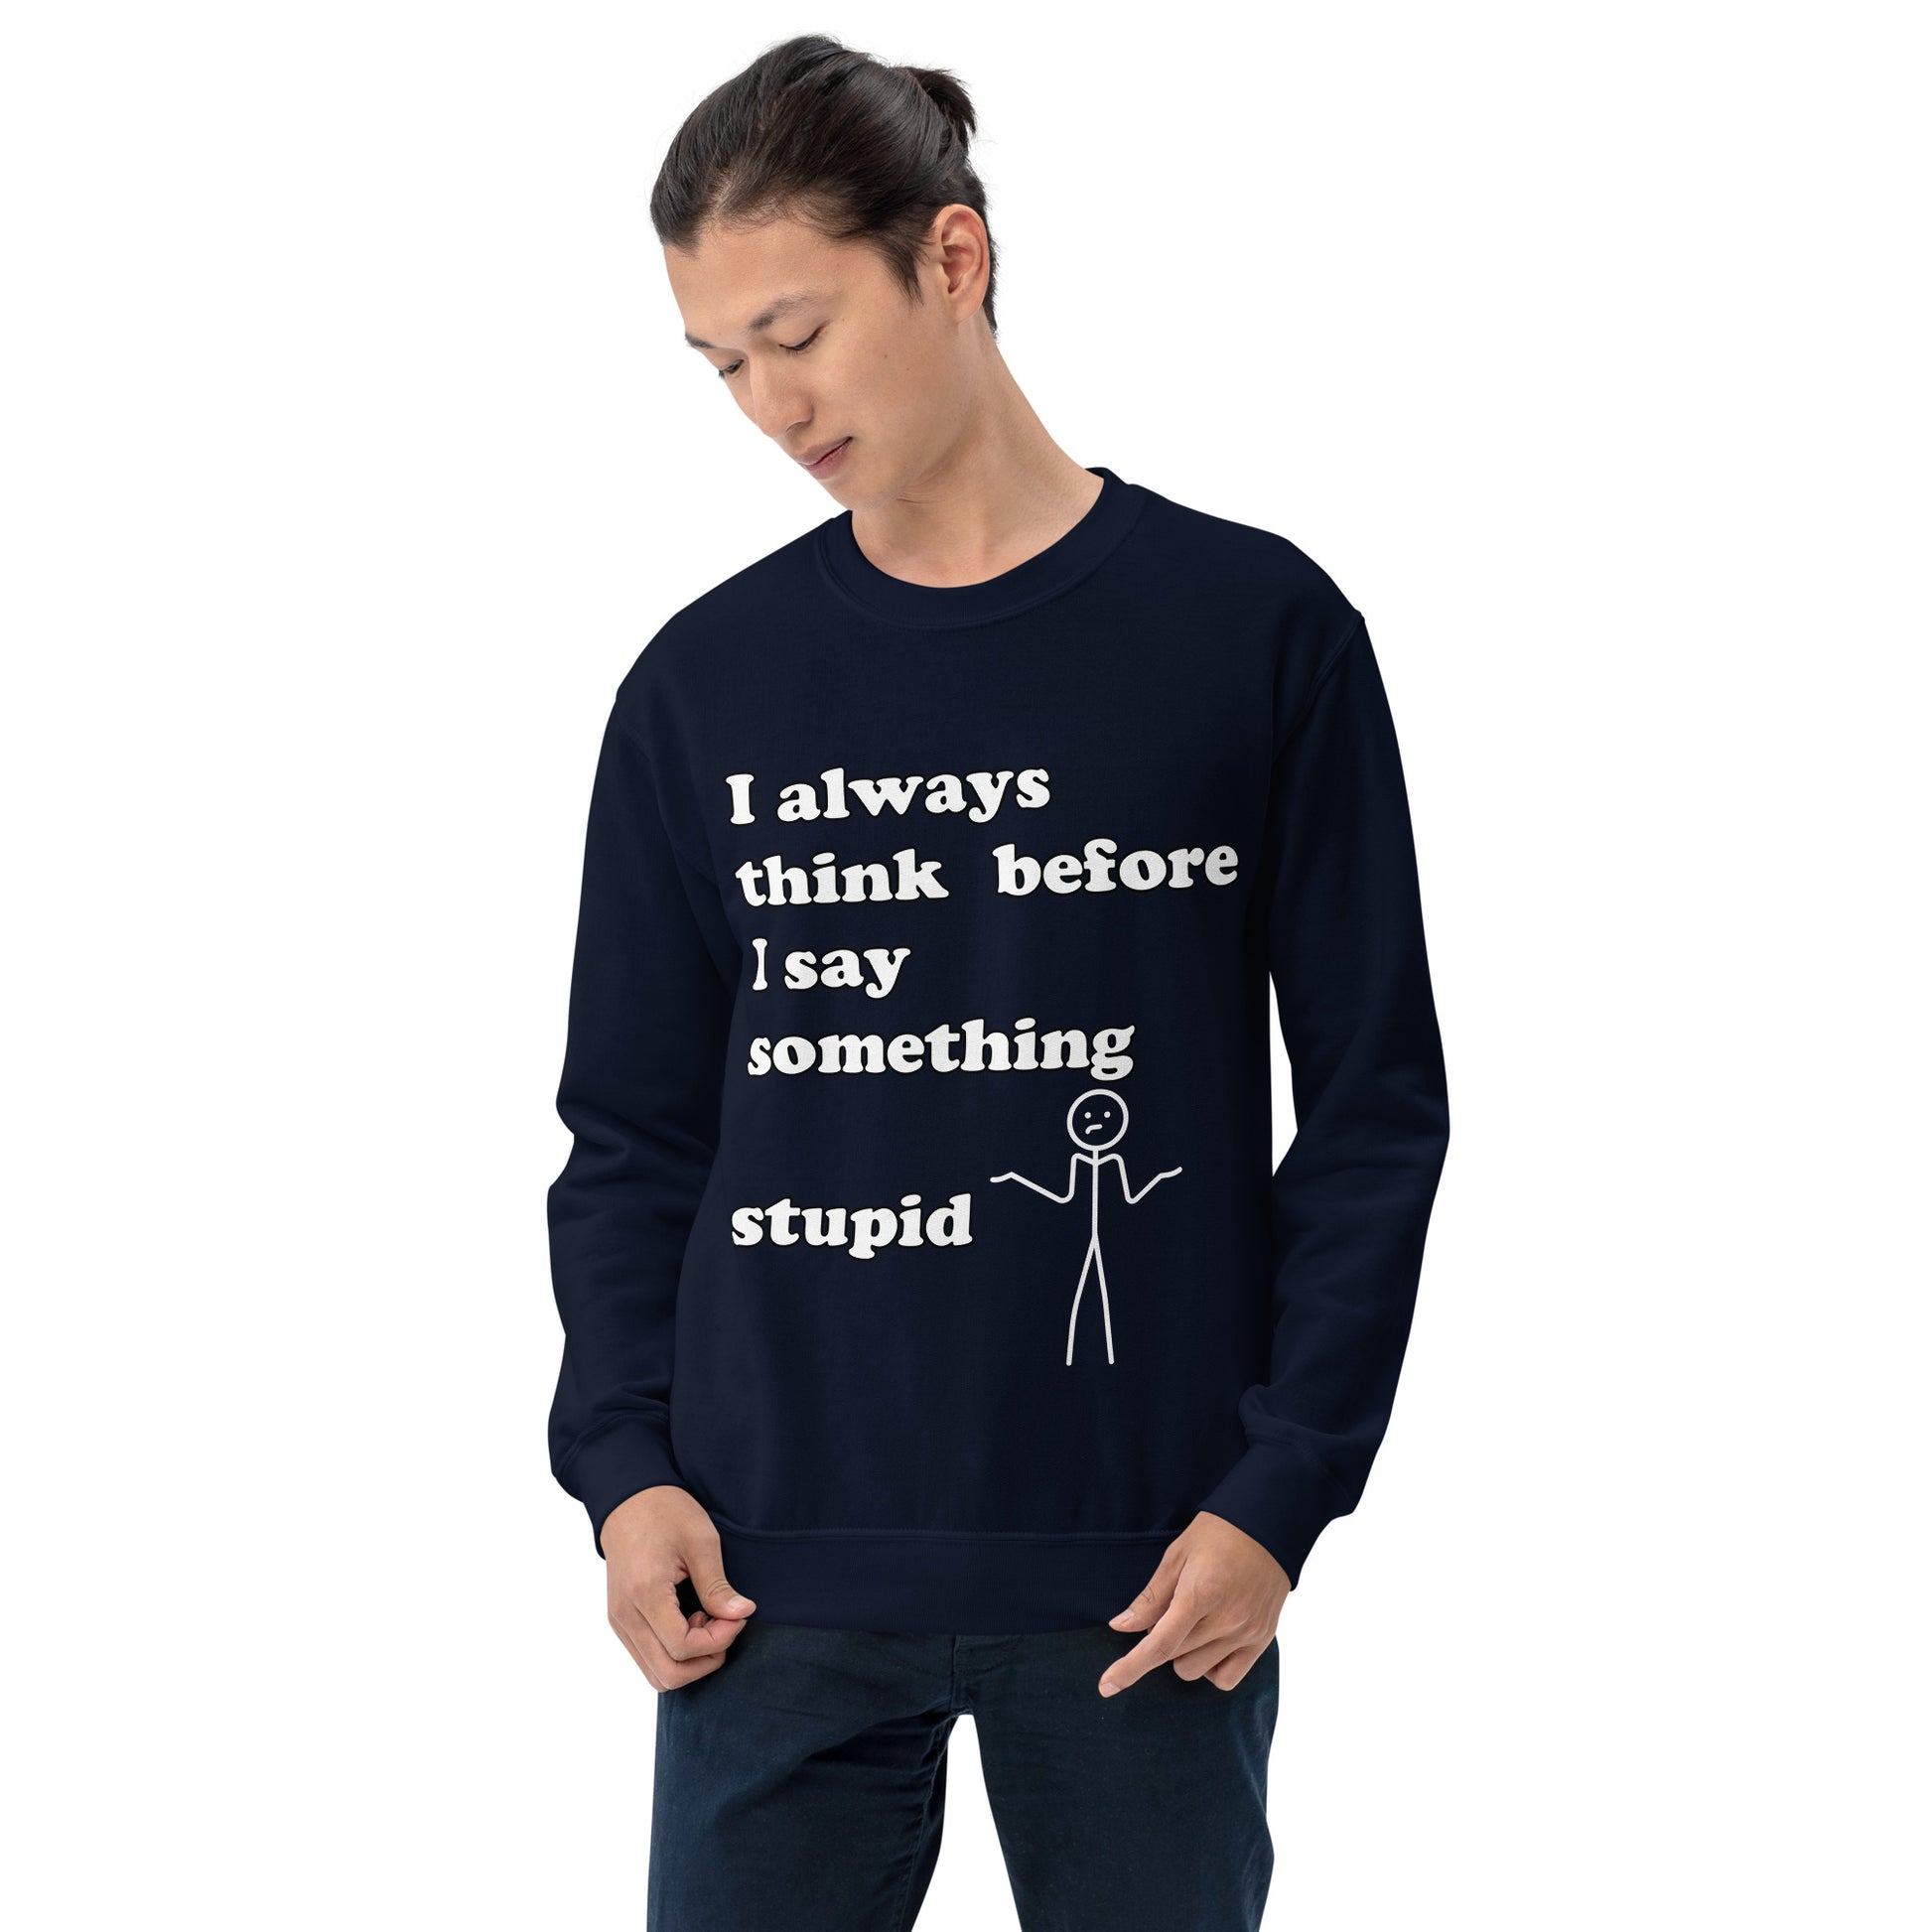 Man with navy blue sweatshirt with text "I always think before I say something stupid"